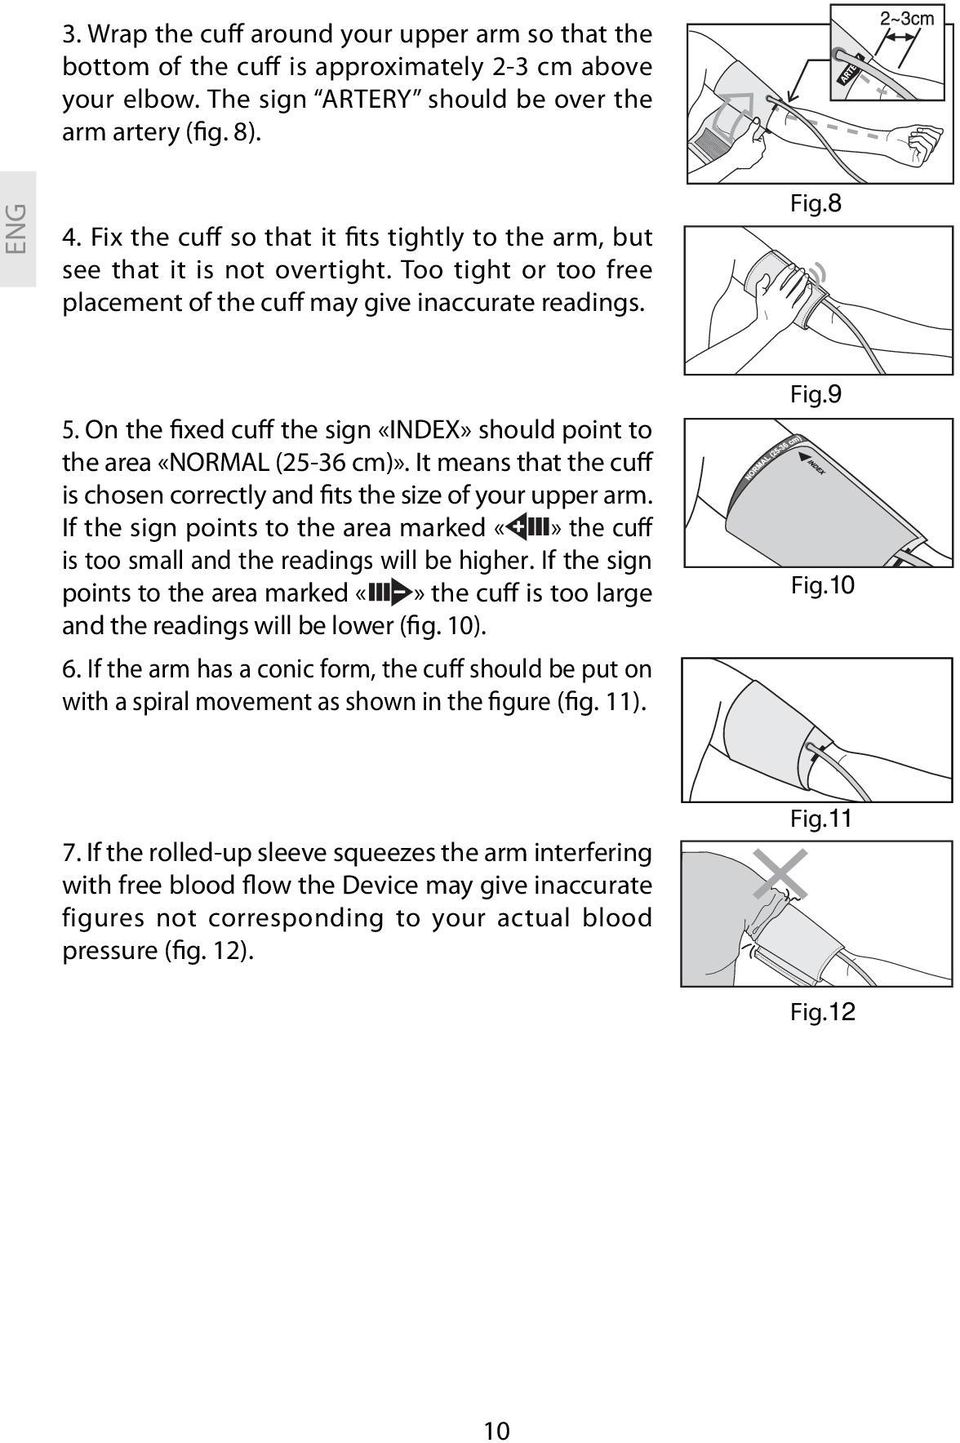 On the fixed cuff the sign «INDEX» should point to the area «NORMAL (25-36 cm)». It means that the cuff is chosen correctly and fits the size of your upper arm.